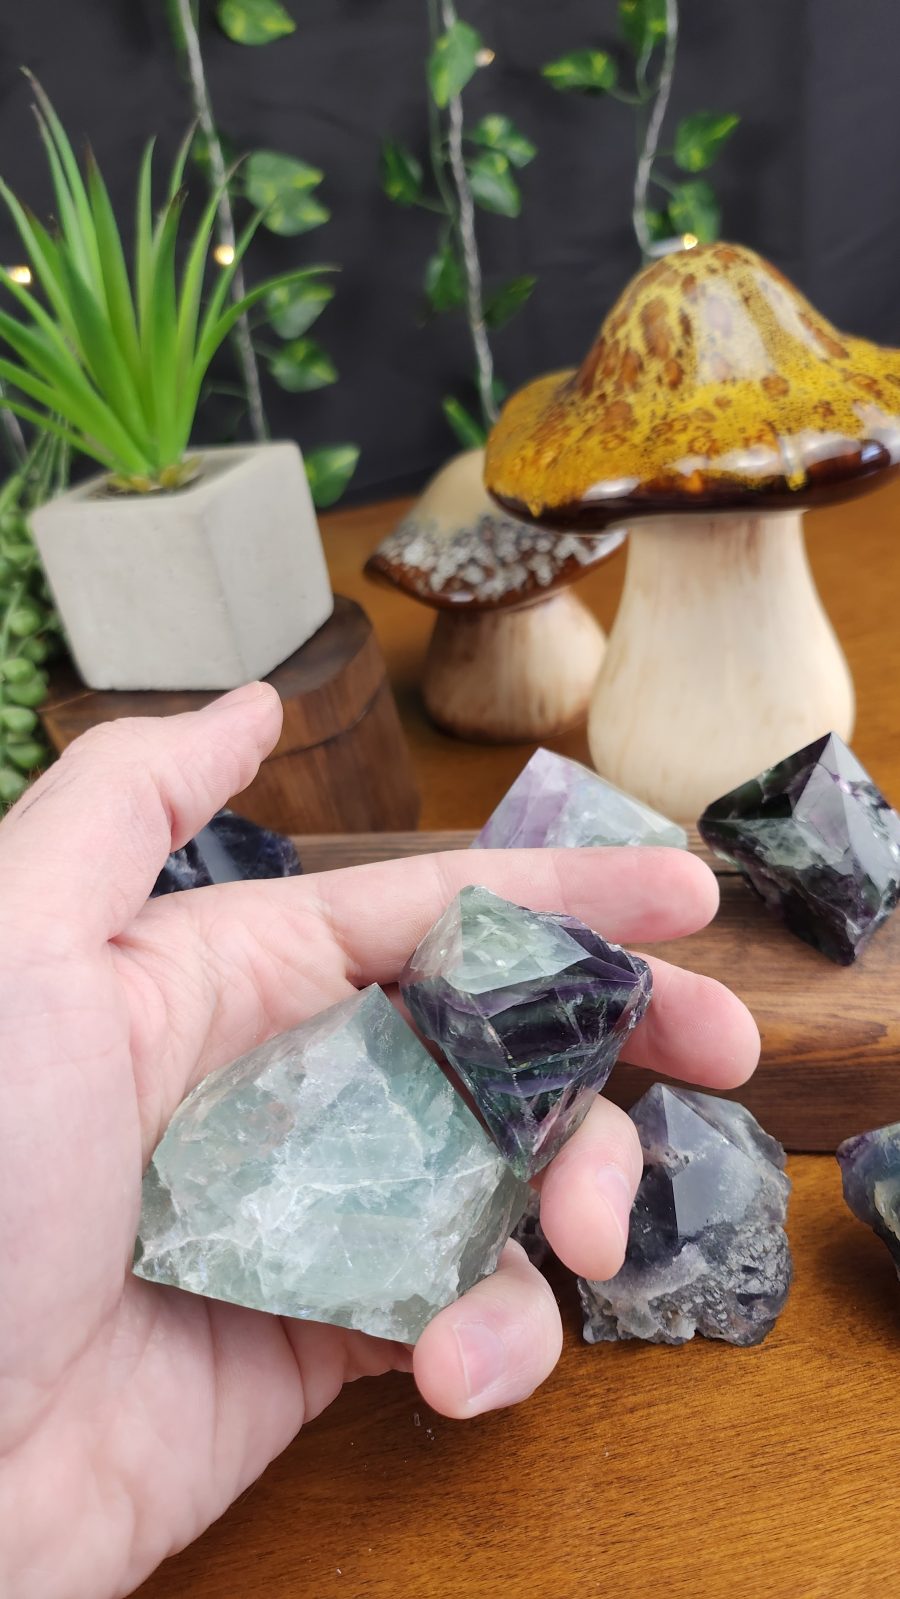 Rainbow Fluorite Rough Crystal Points shown in hand for scale.